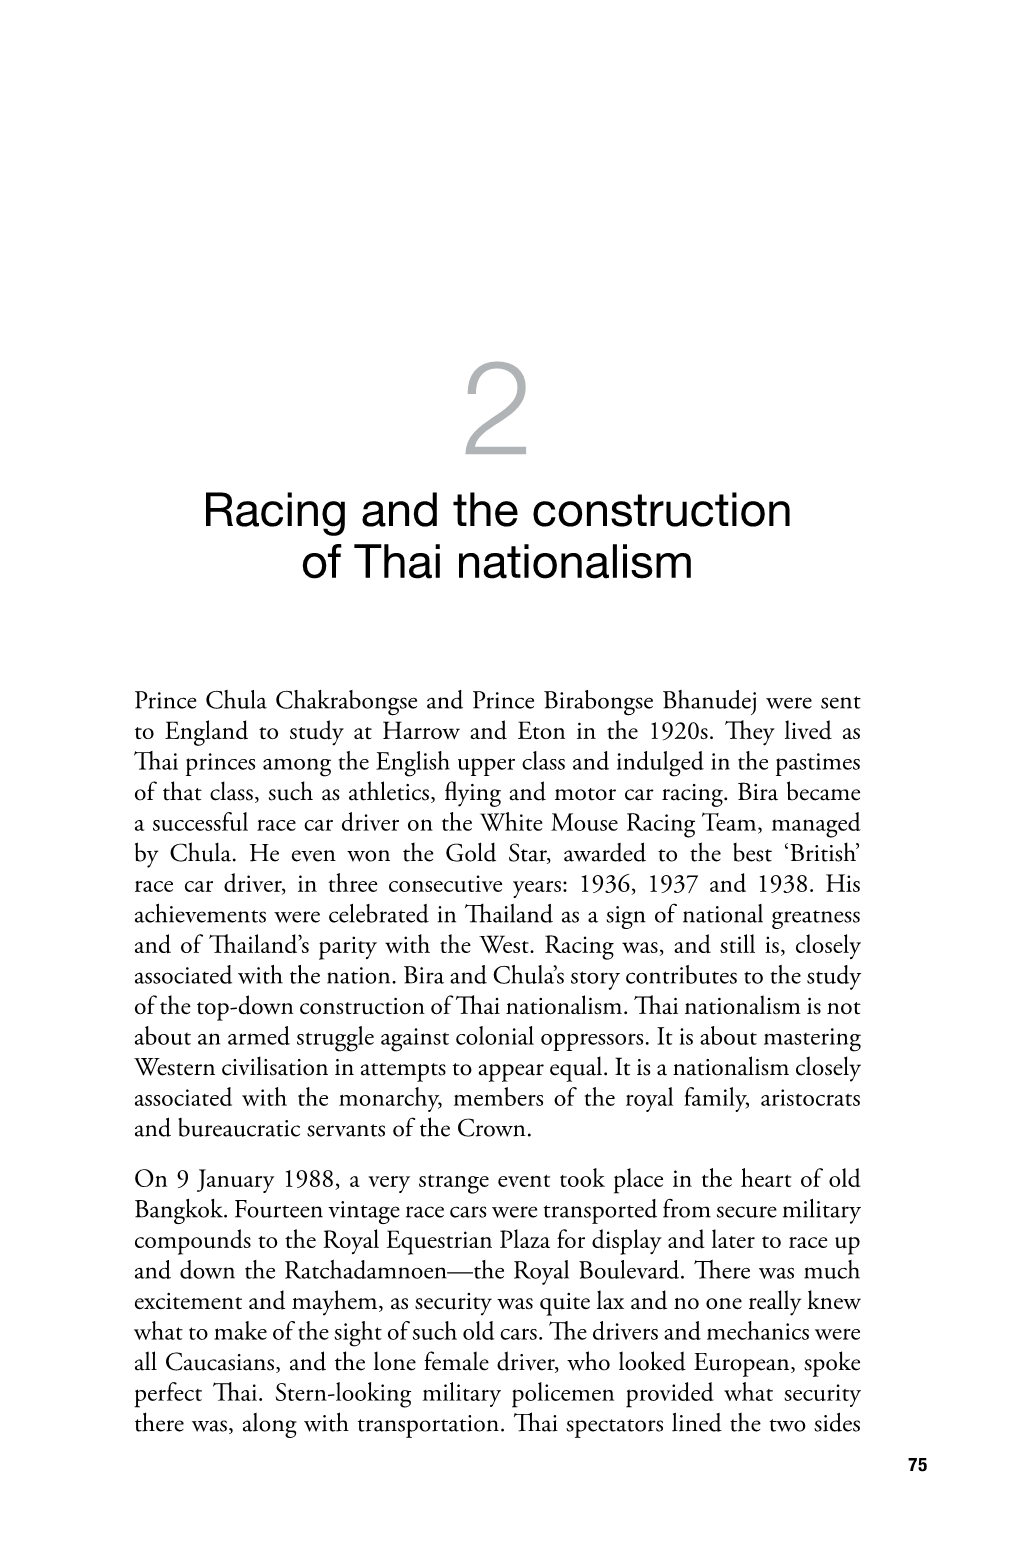 2. Racing and the Construction of Thai Nationalism